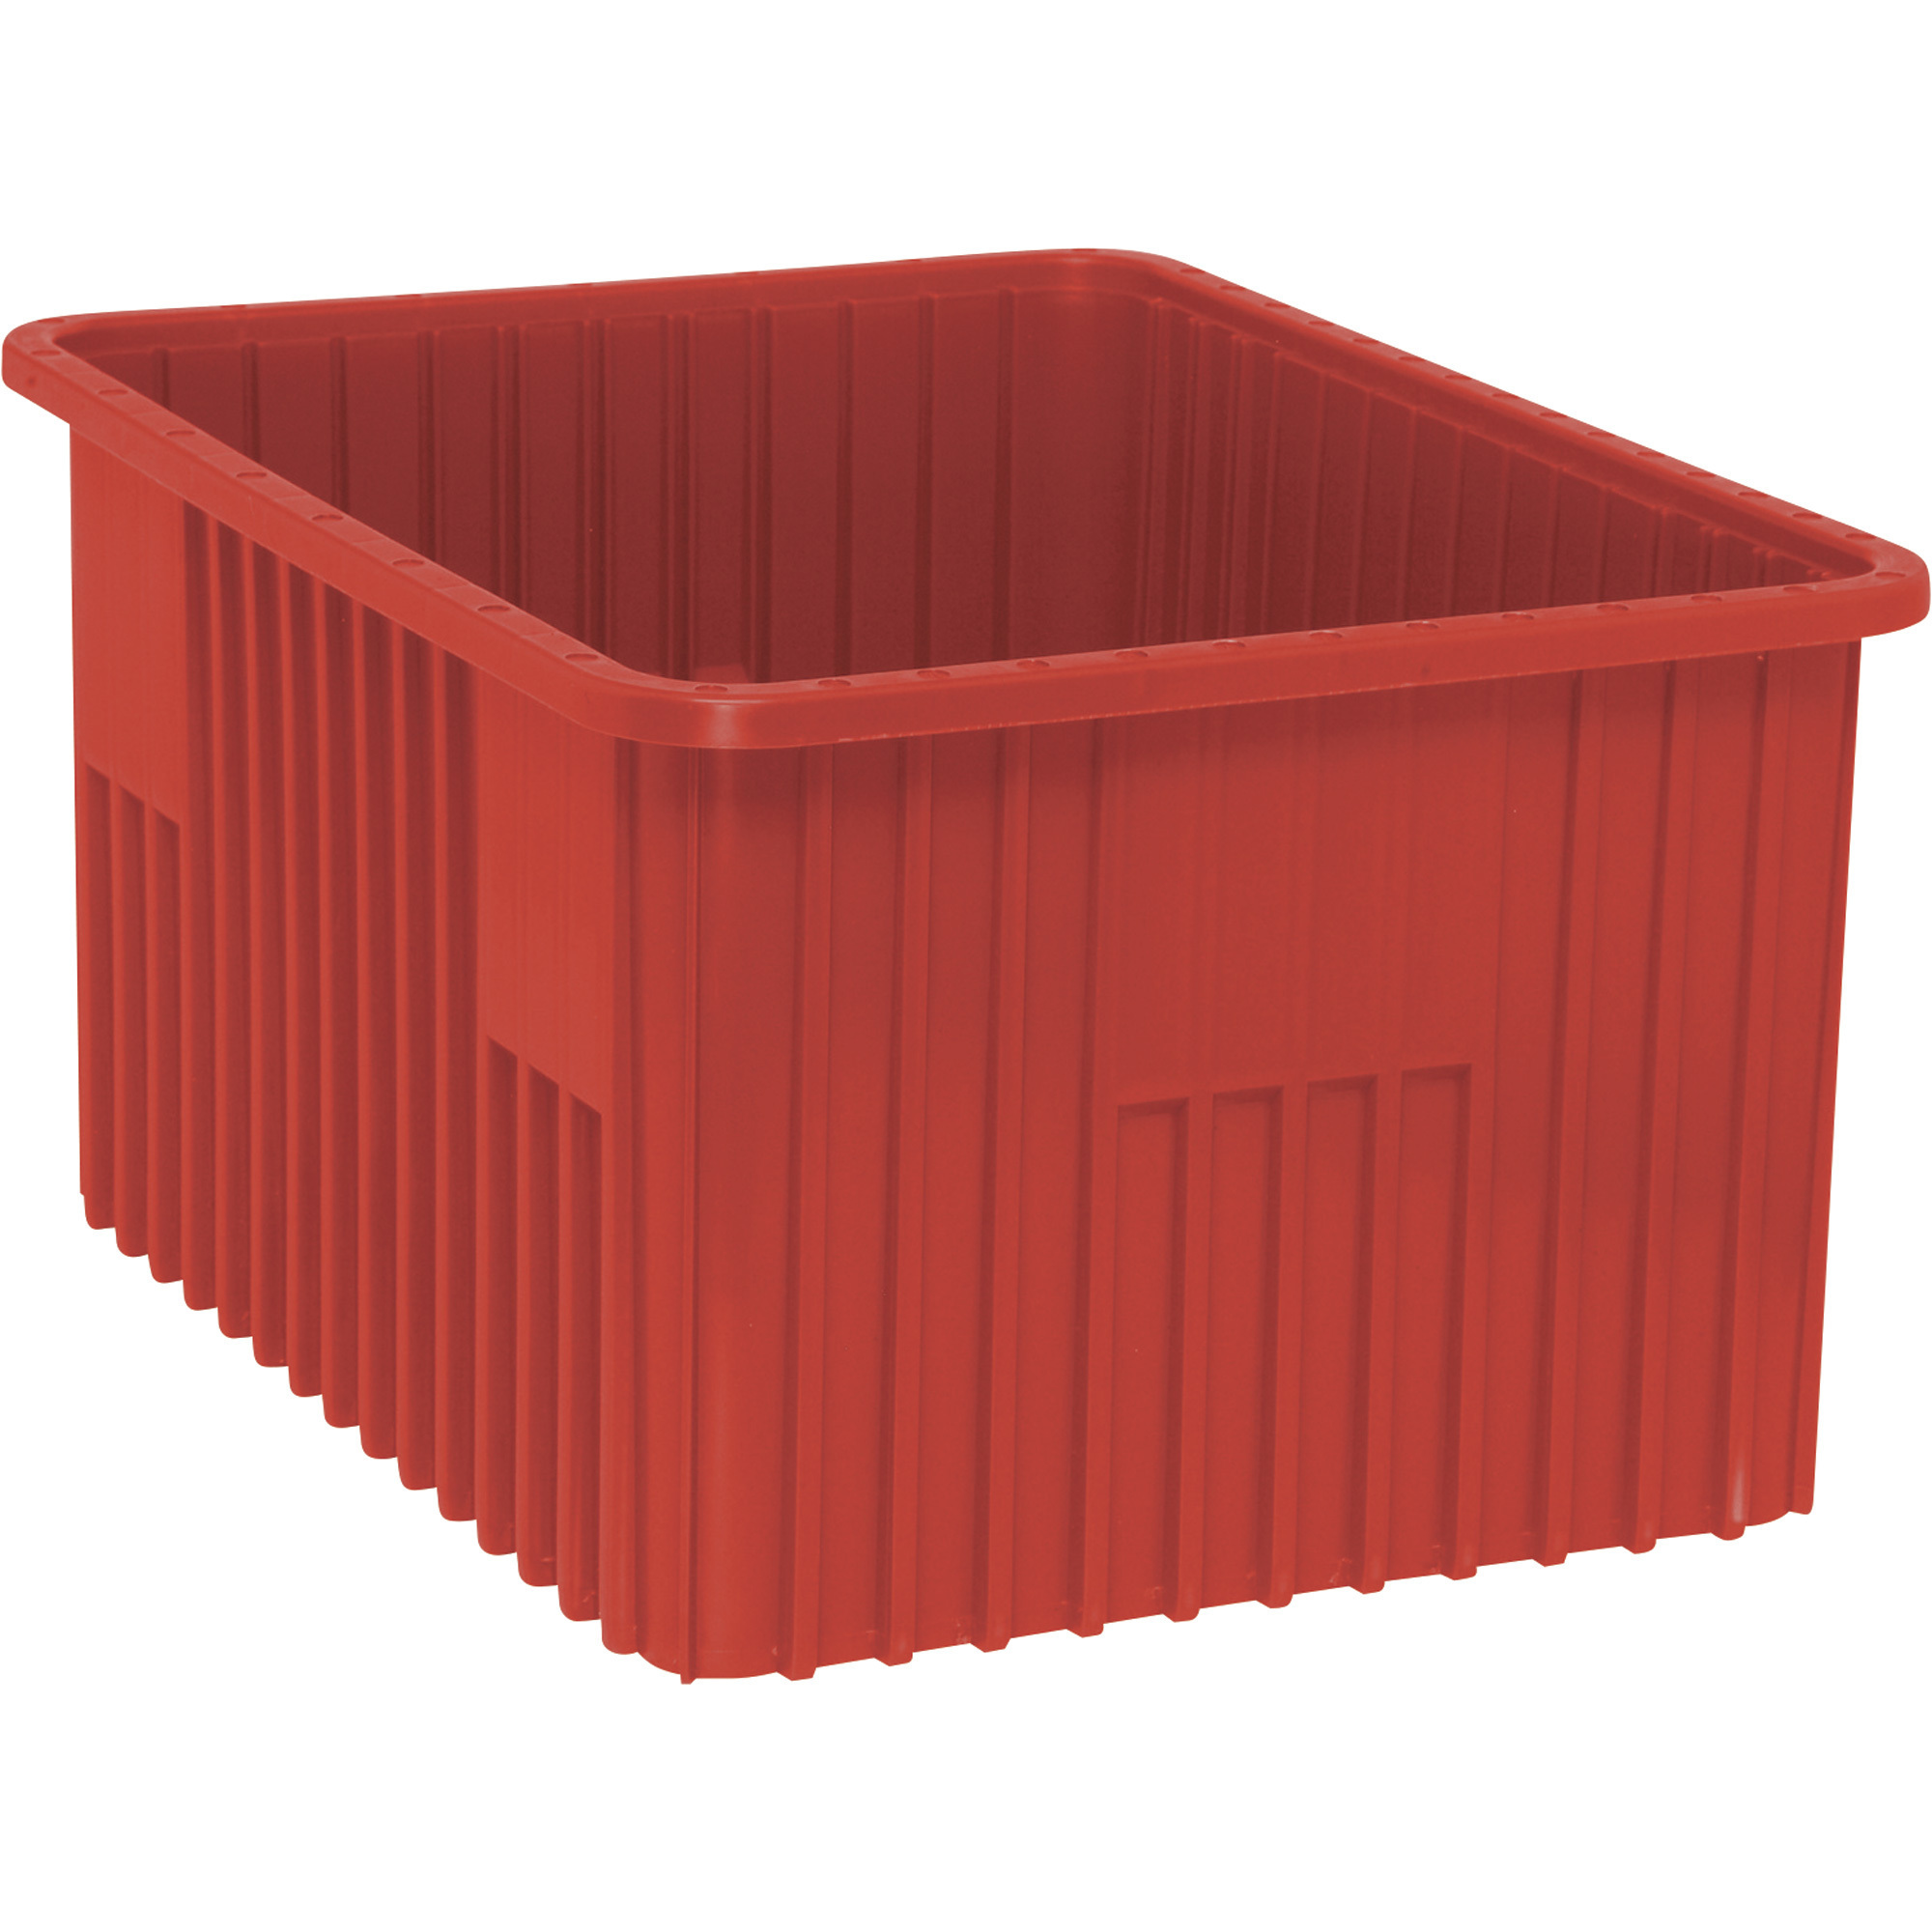 Quantum Storage Dividable Grid Container, 3-Pack, 22 1/2Inch L x 17 1/2Inch W x 12Inch H, Red, Model DG93120RD